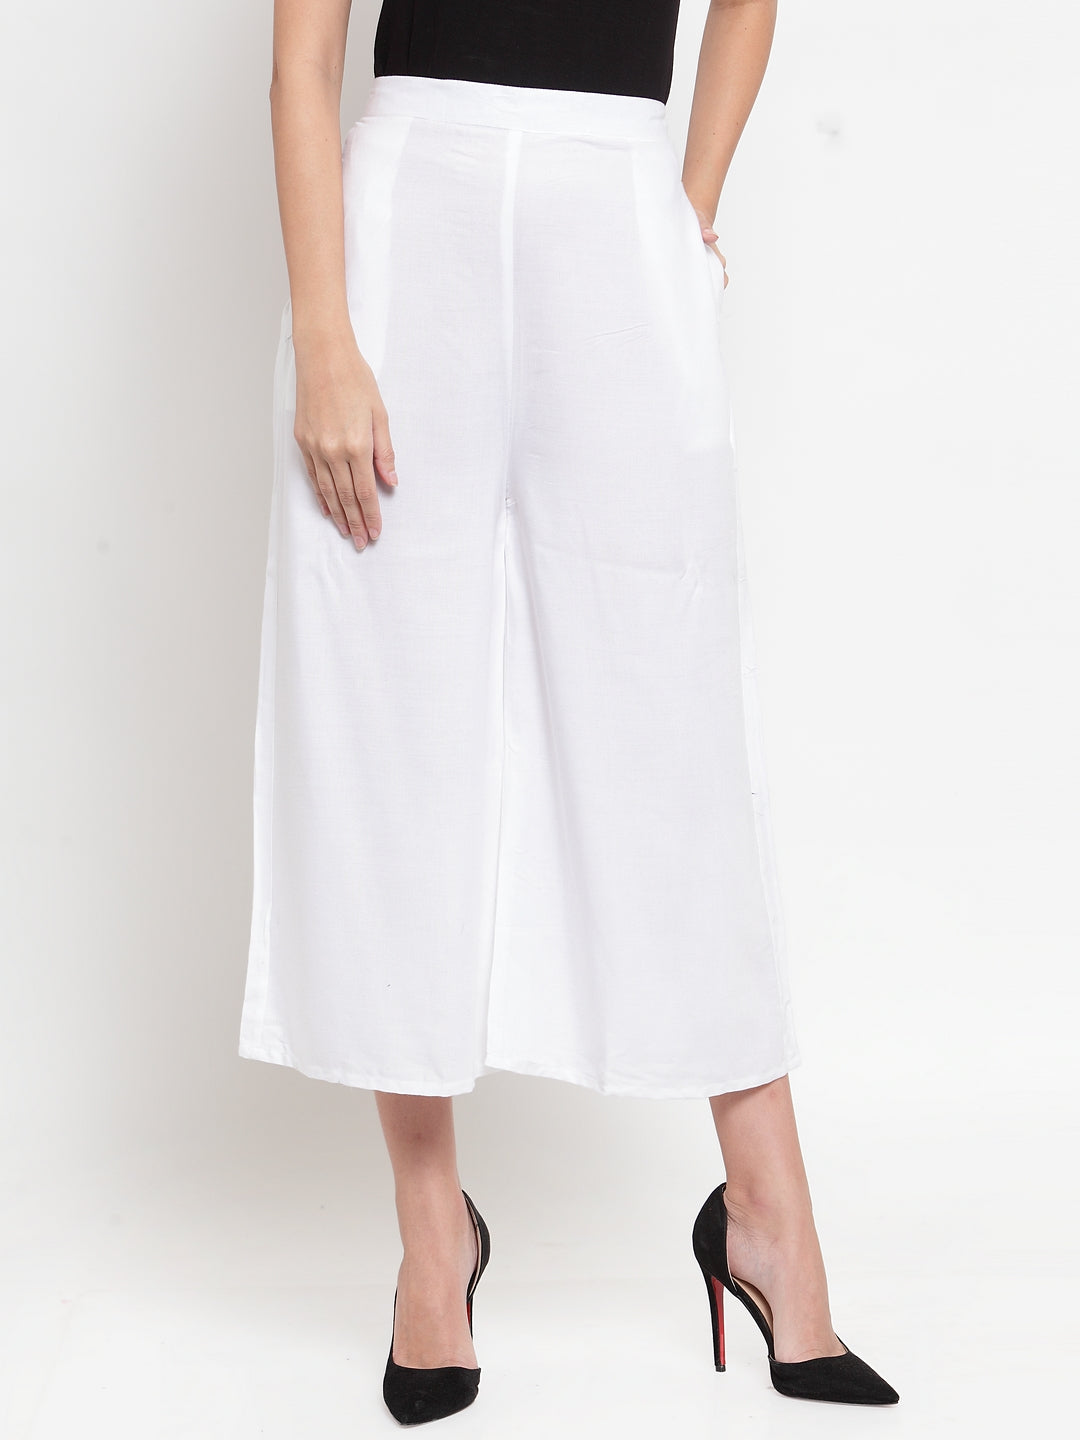 Women's White Solid Rayon Culottes - Wahe-NOOR